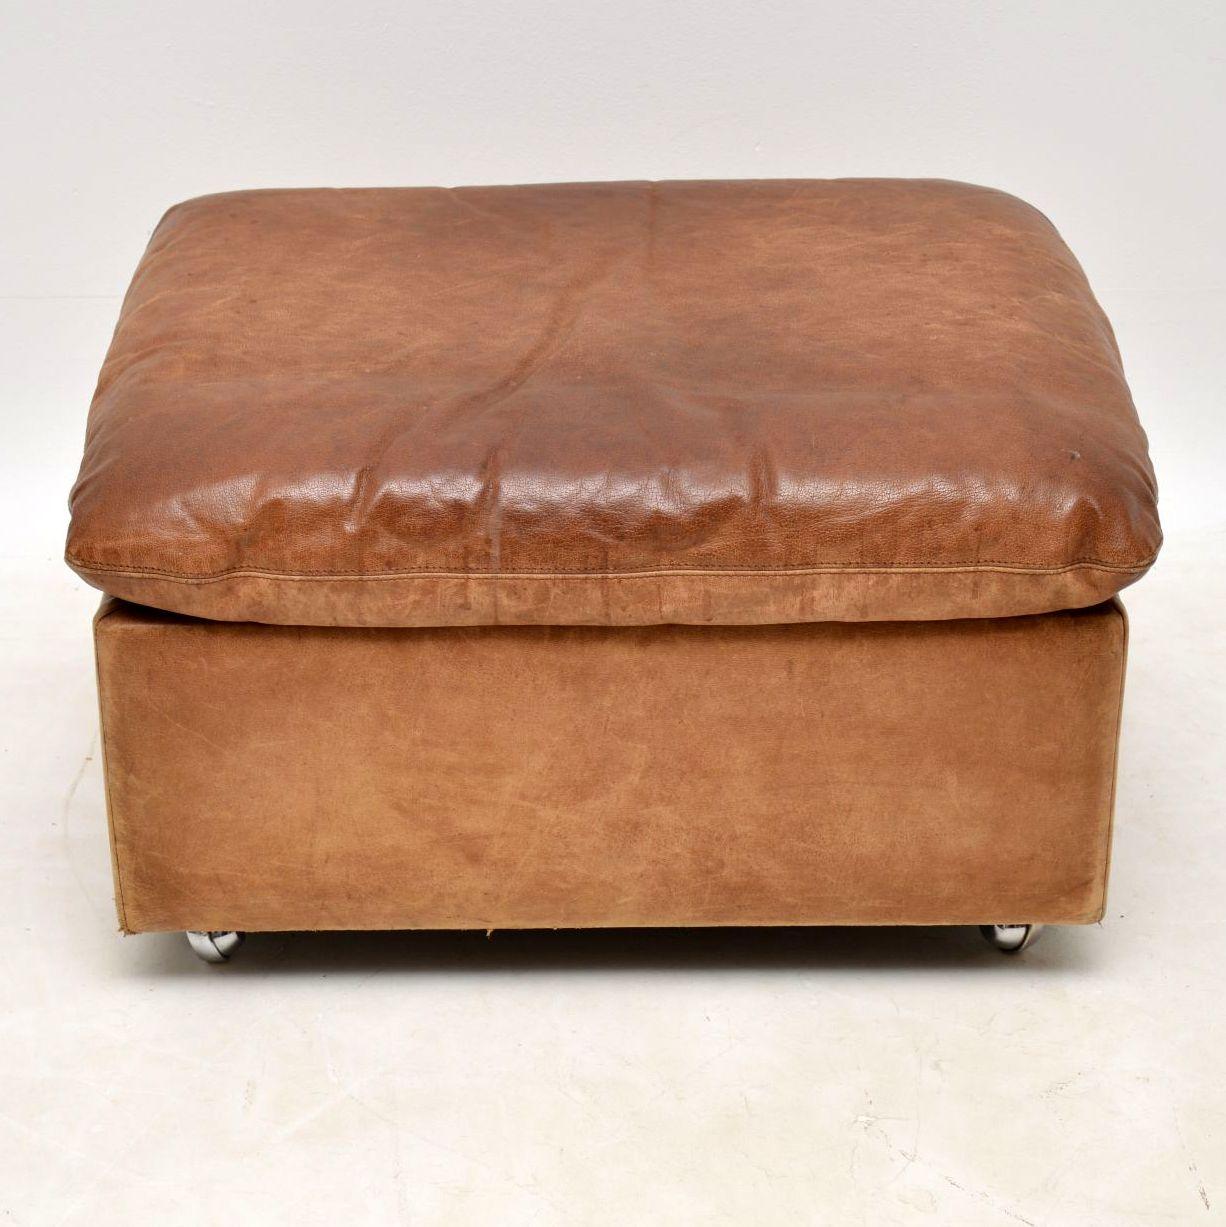 A beautiful and very well made vintage ottoman in high quality tanned leather, sitting on chrome casters. It dates from around the 1960s-1970s, and is in lovely vintage condition; the leather is thick and strong, with no rips or tears. This has